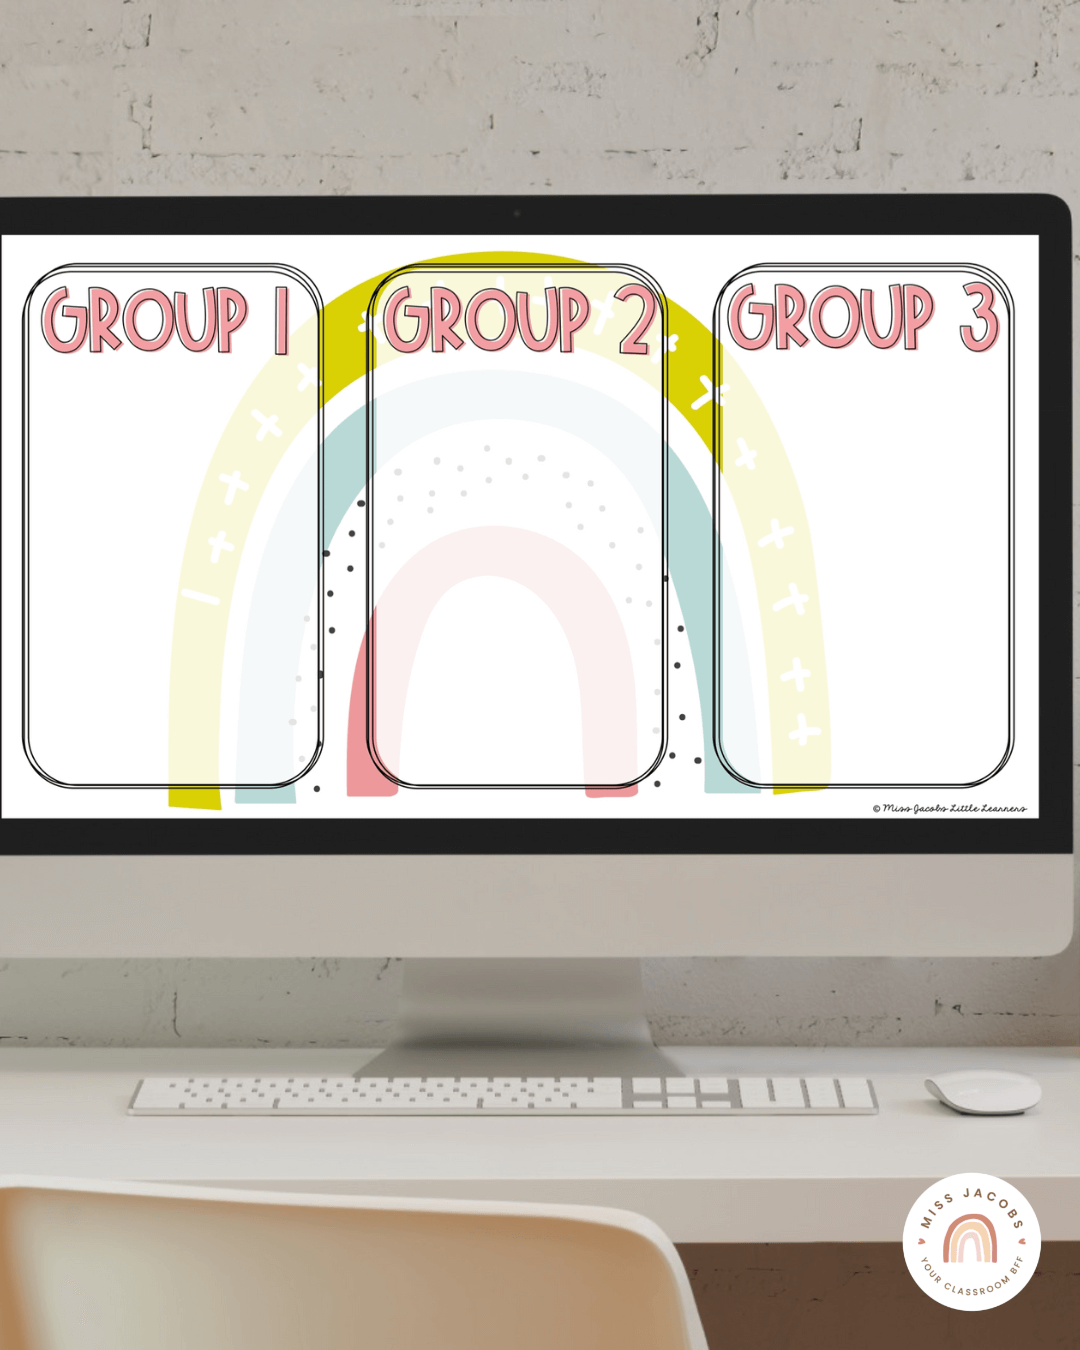 Two images show screenshots of the slides templates in the Modern Rainbow range. They feature varying shades of blue greens, lime and salmon tones, with a spotted background.